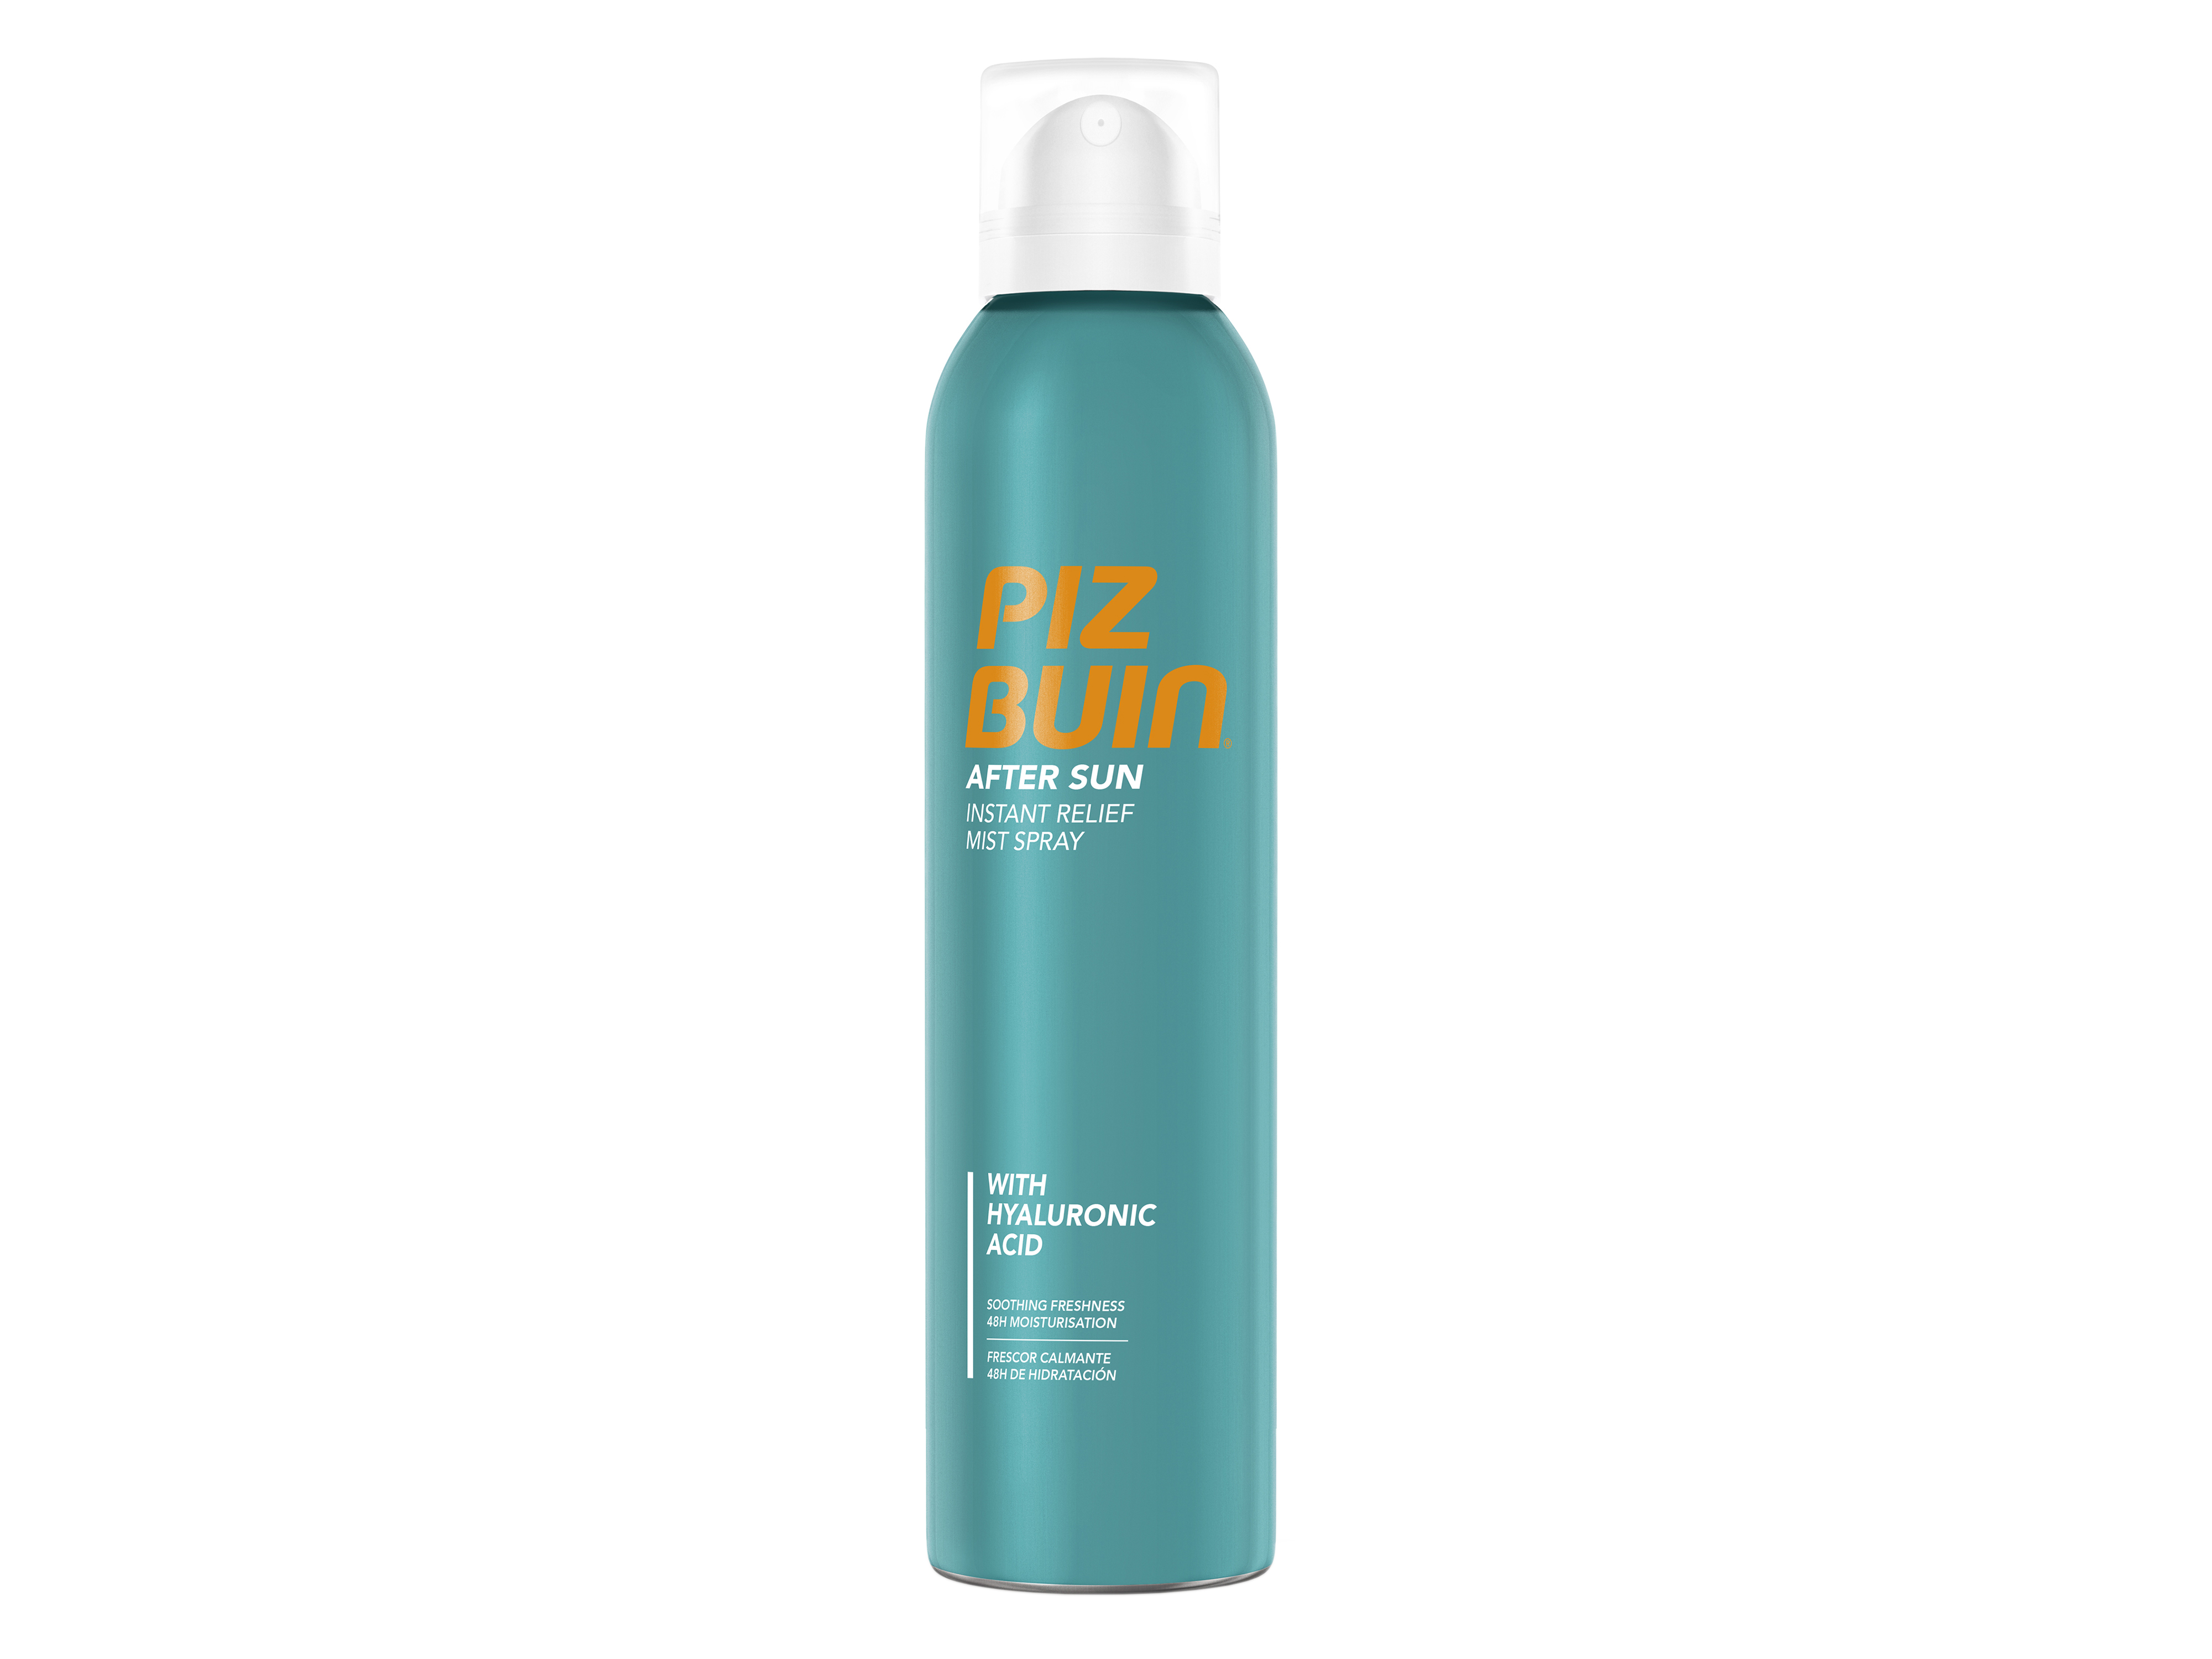 After Sun Instant Relief Mist, 200 ml